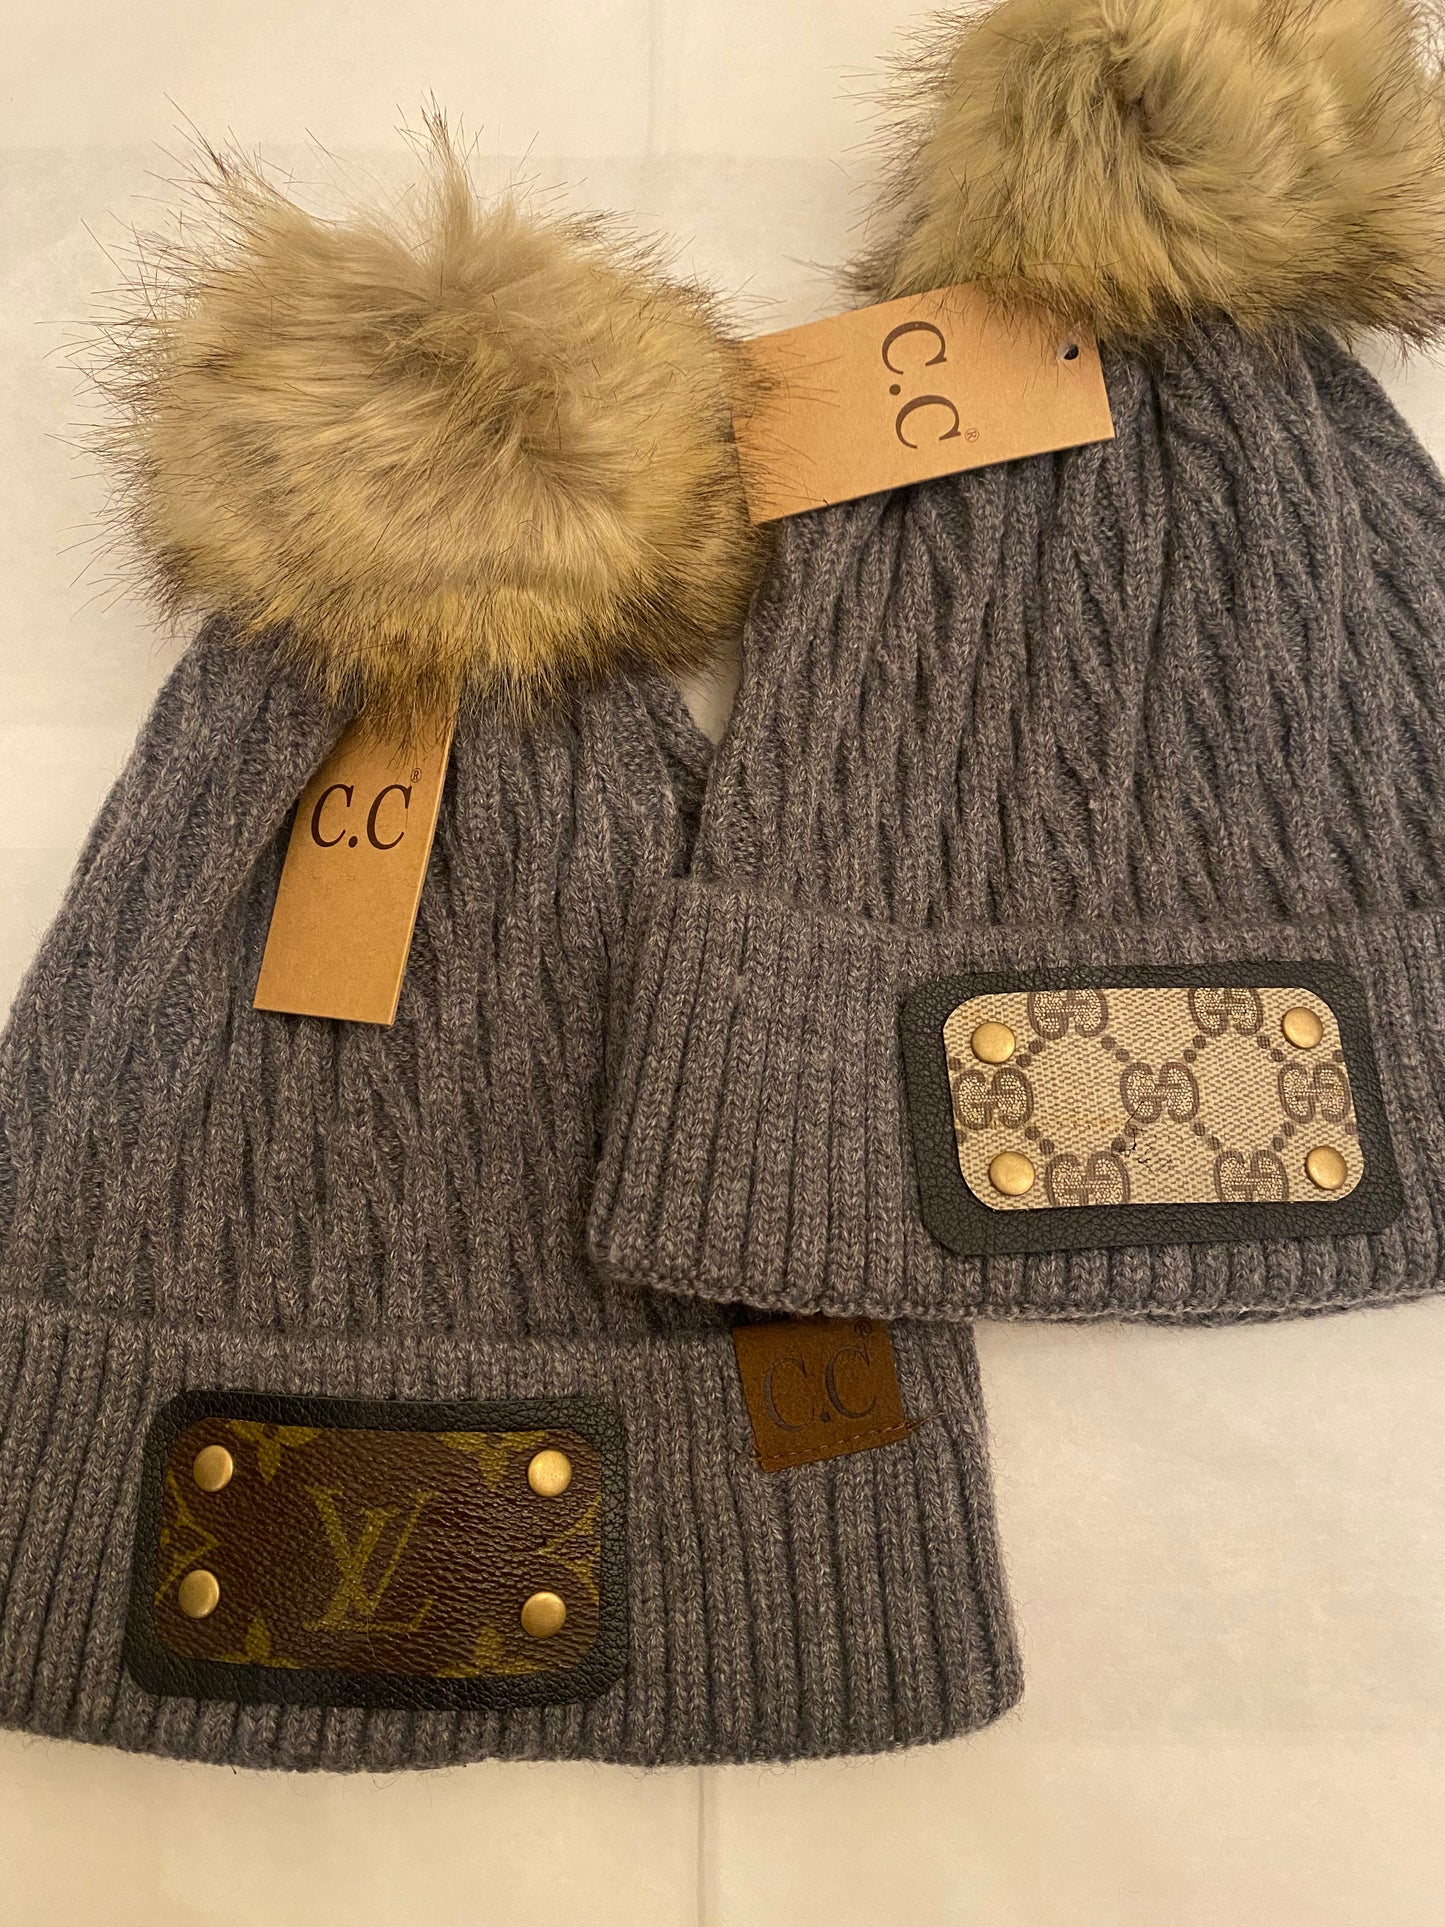 Upcycled Beanies